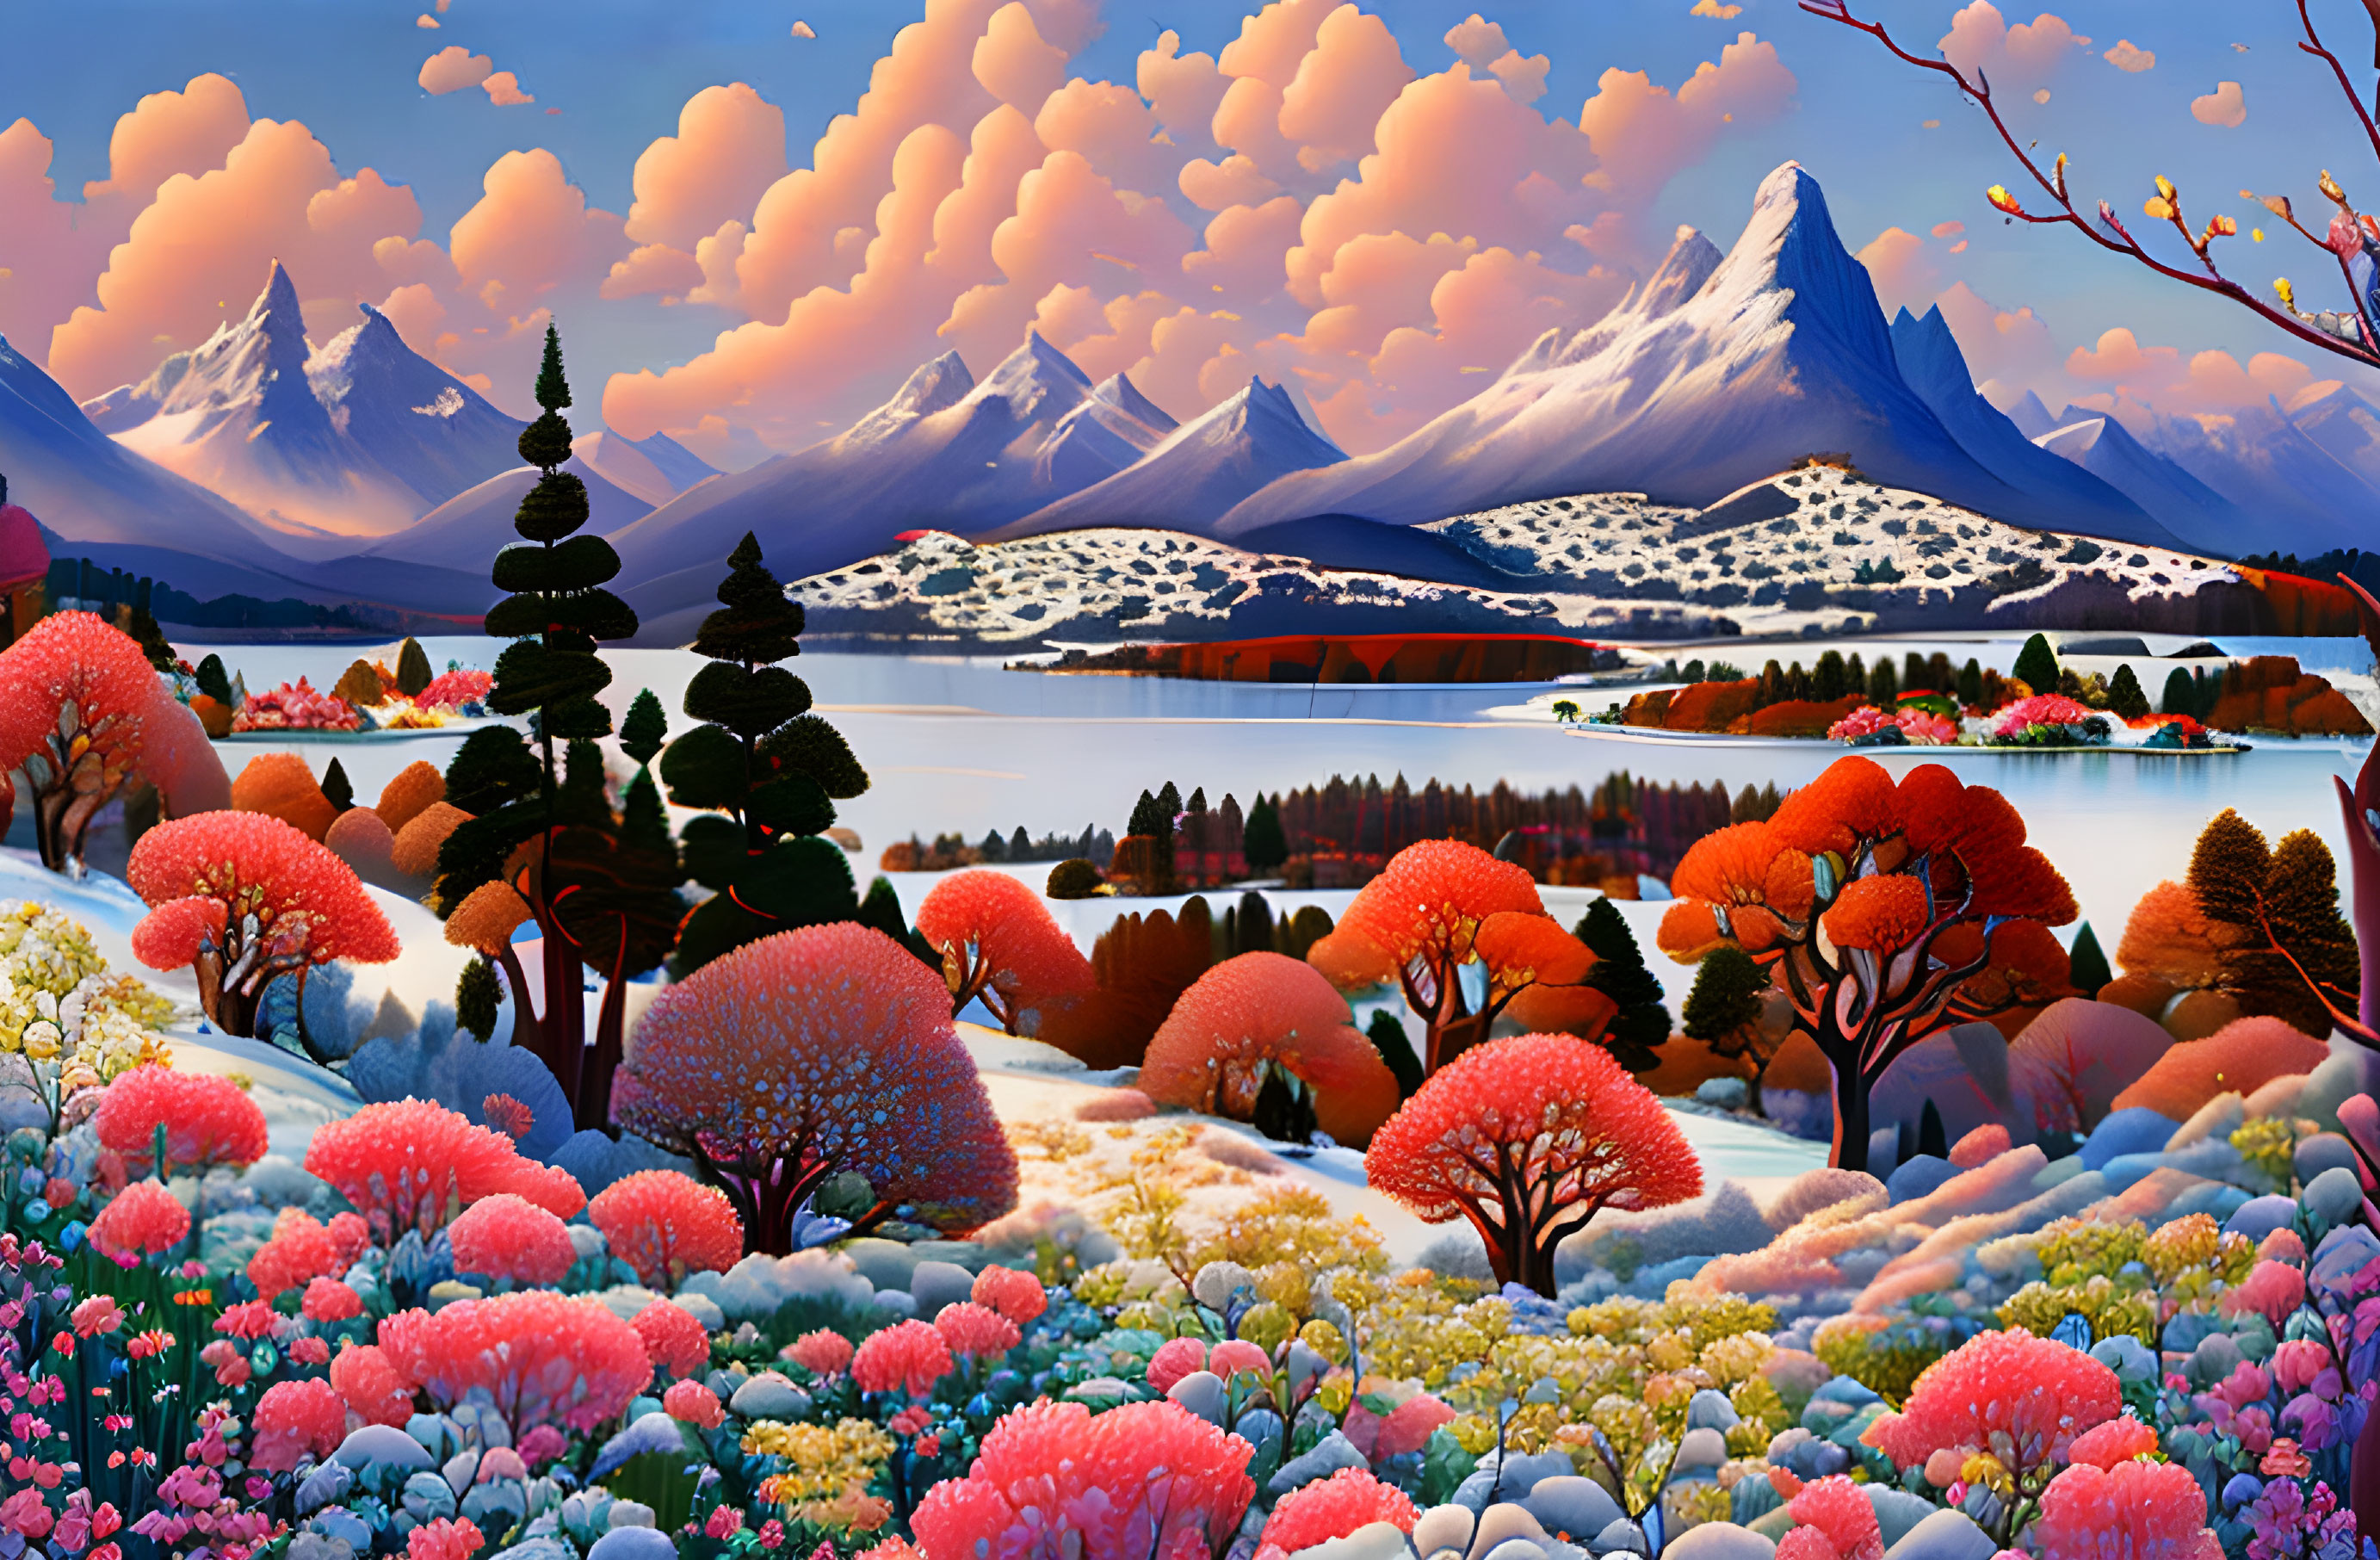 Colorful landscape with snow-capped mountains, serene lake, and blossoming trees.